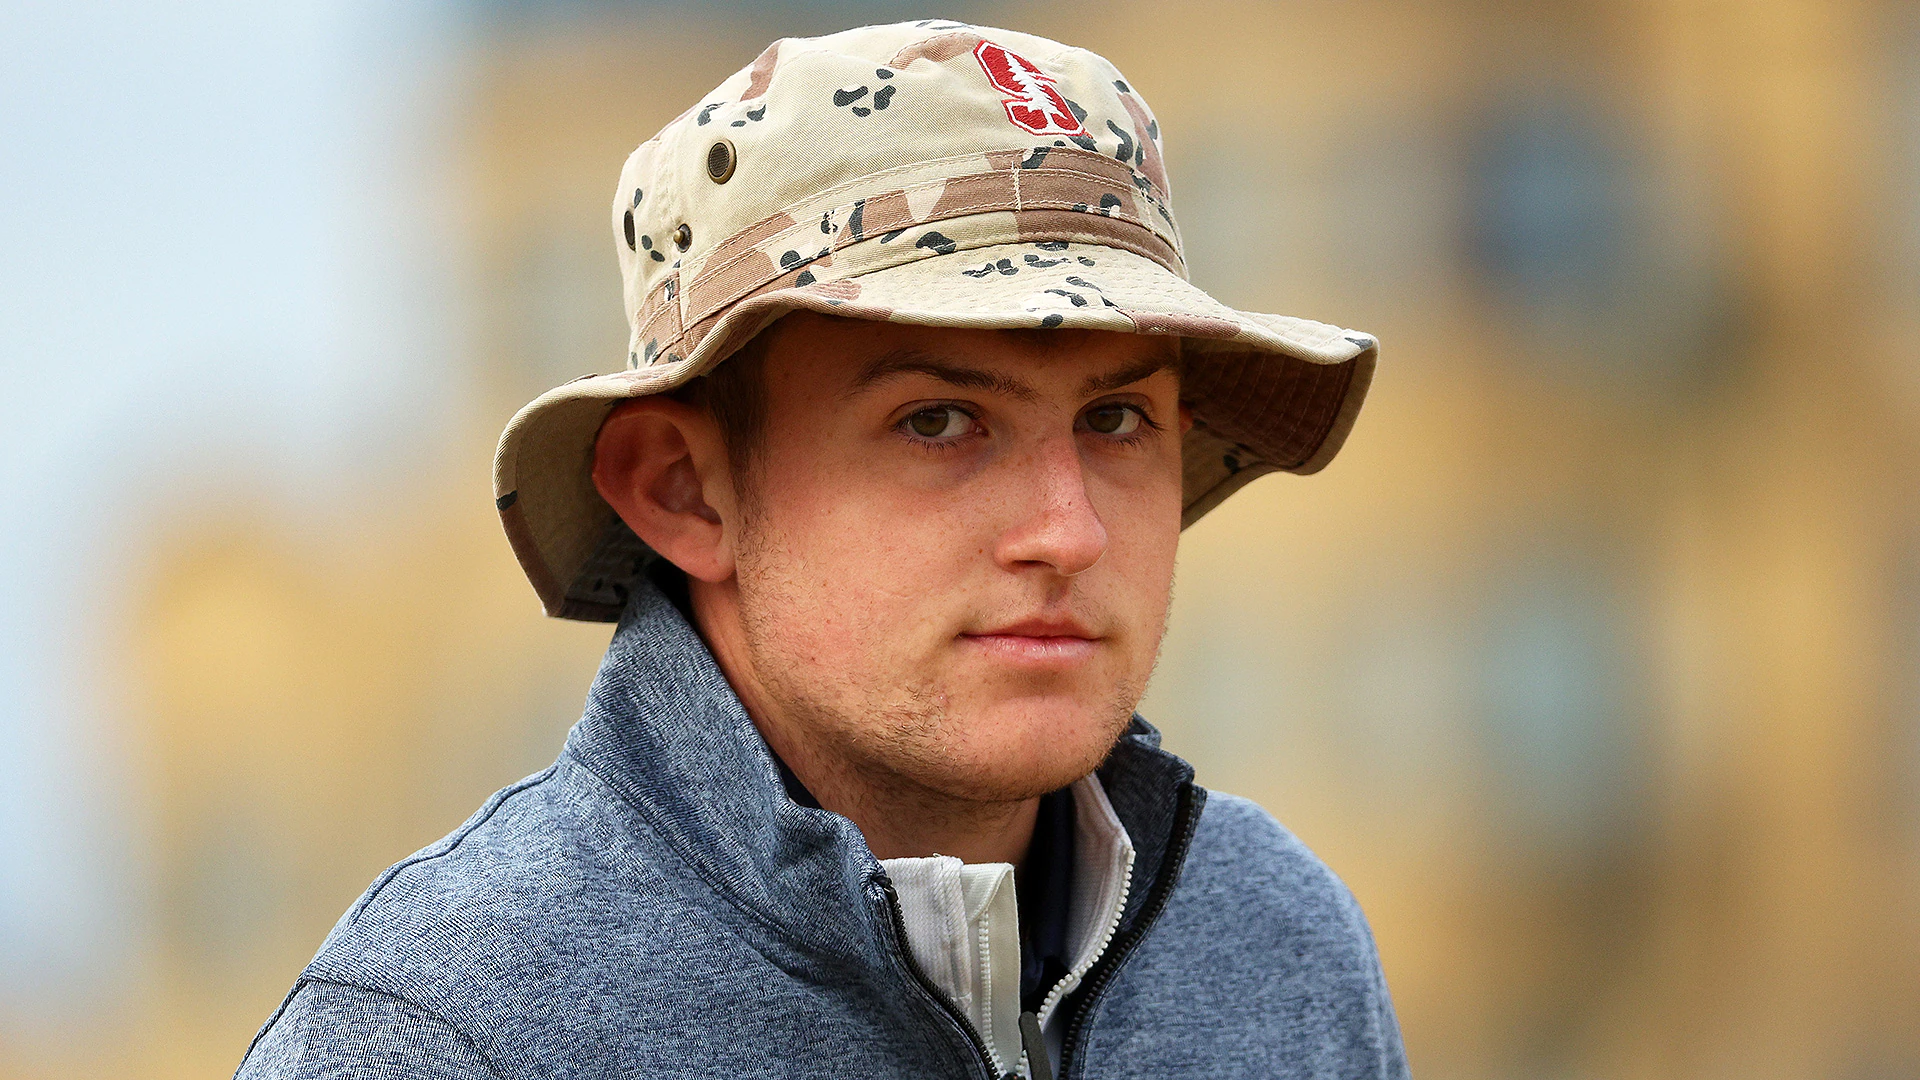 2022 British Open: Amateur Barclay Brown and his floppy hat in contention early at St. Andrews